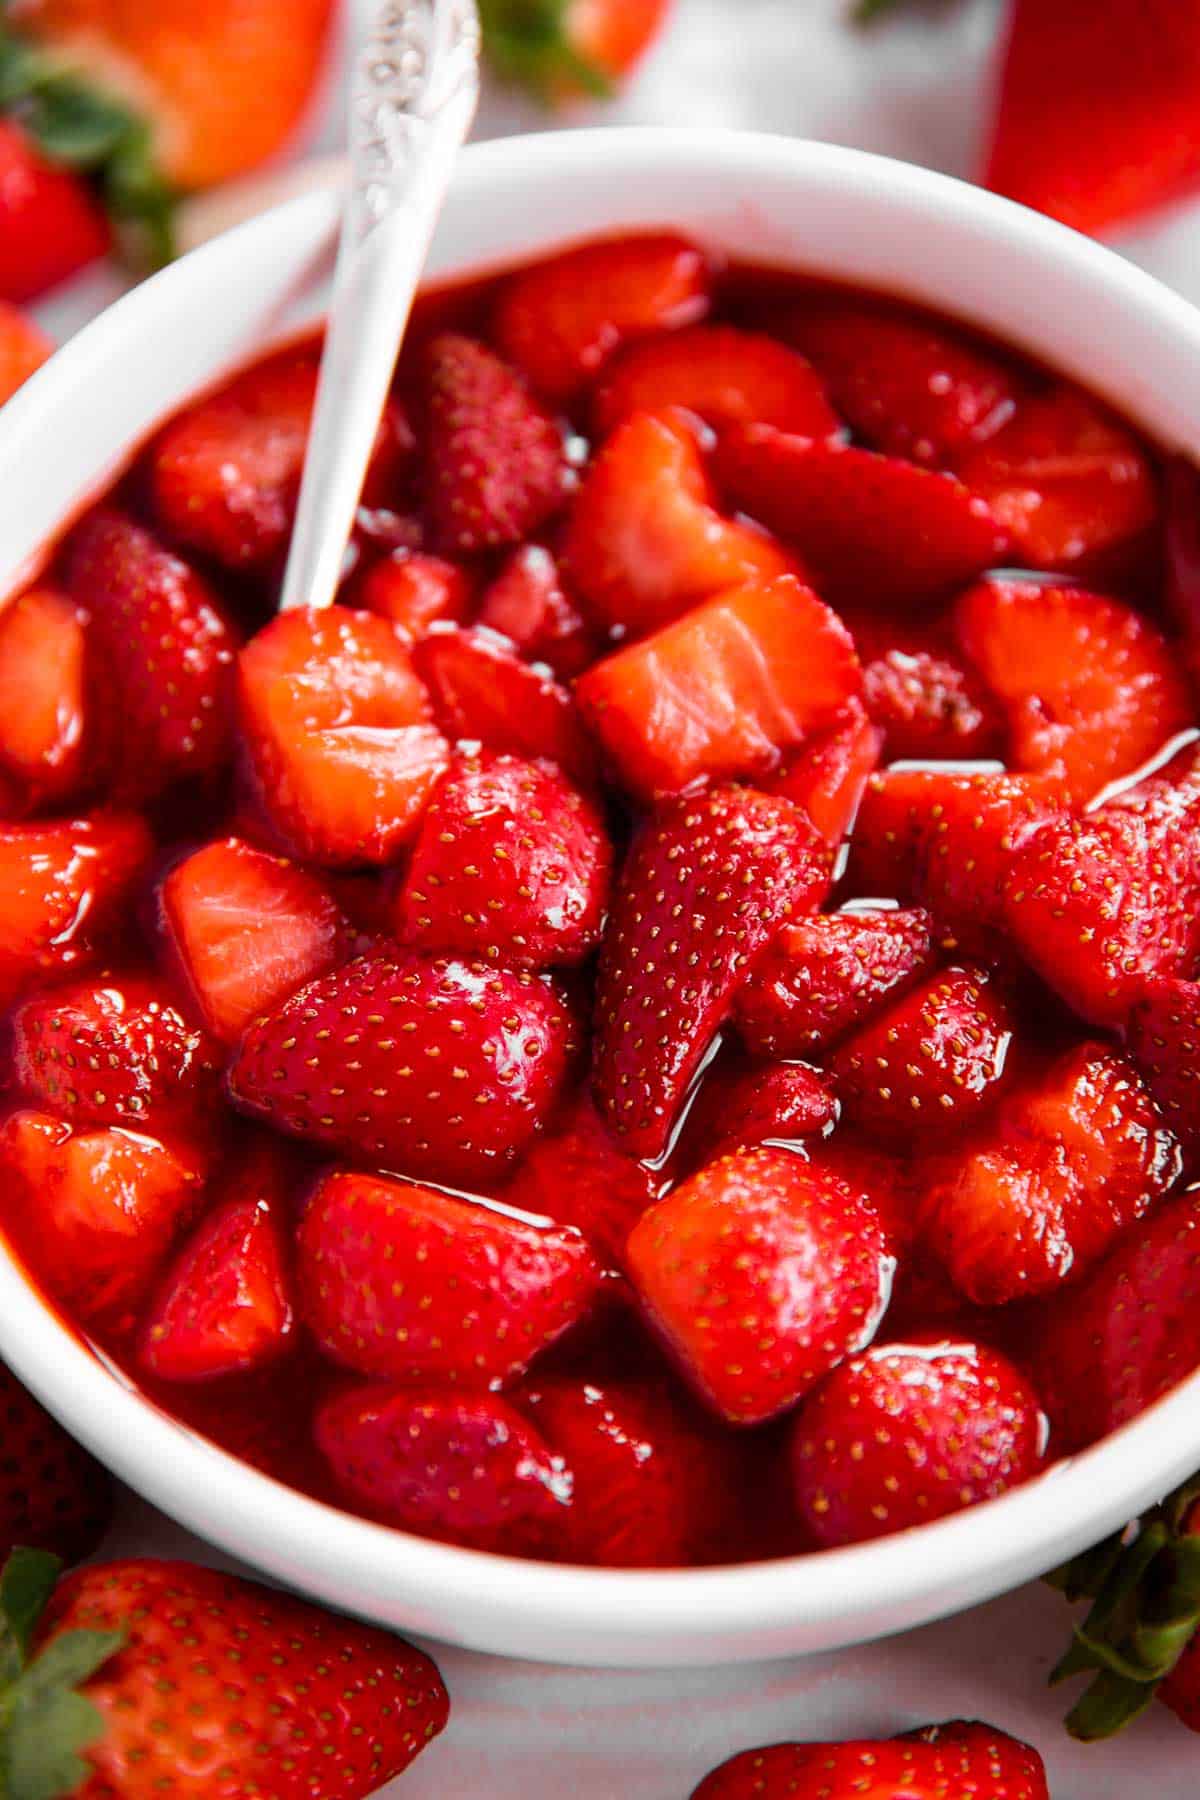 frontal view of strawberry sauce in white bowl, surrounded by more fresh strawberries